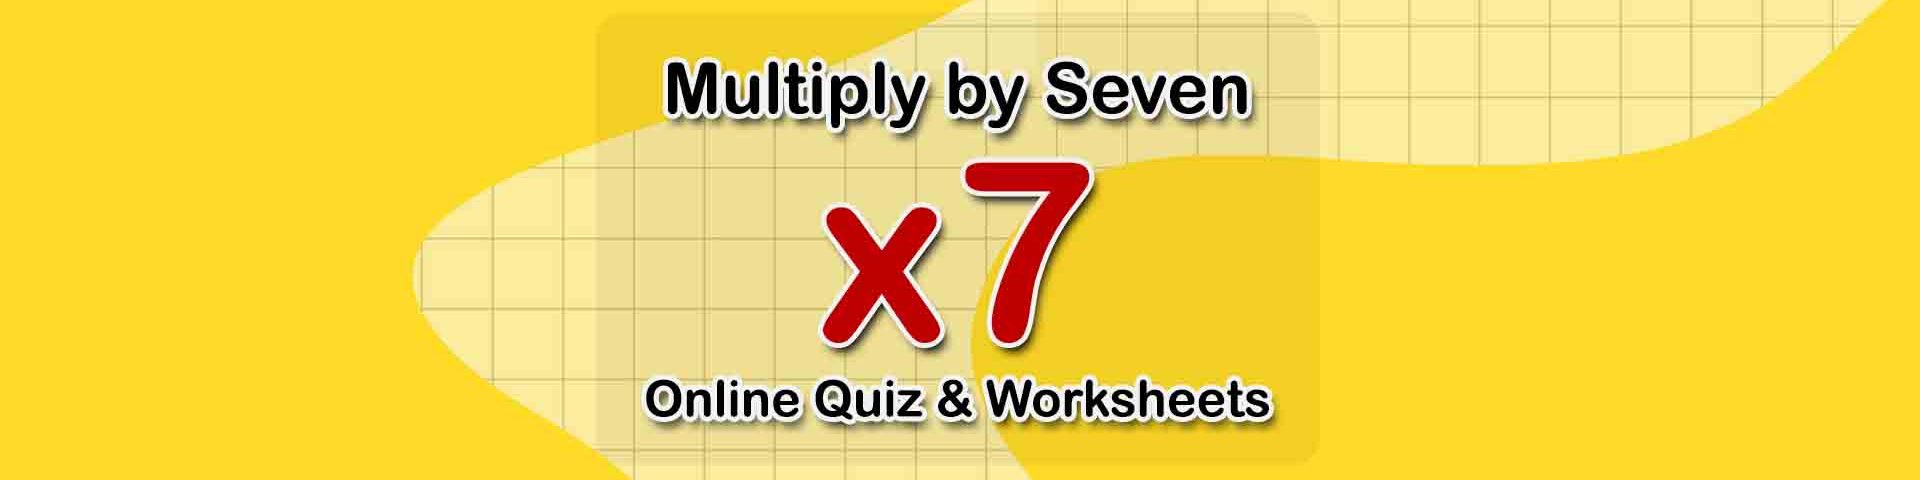 Multiply by Seven online quiz and math worksheets